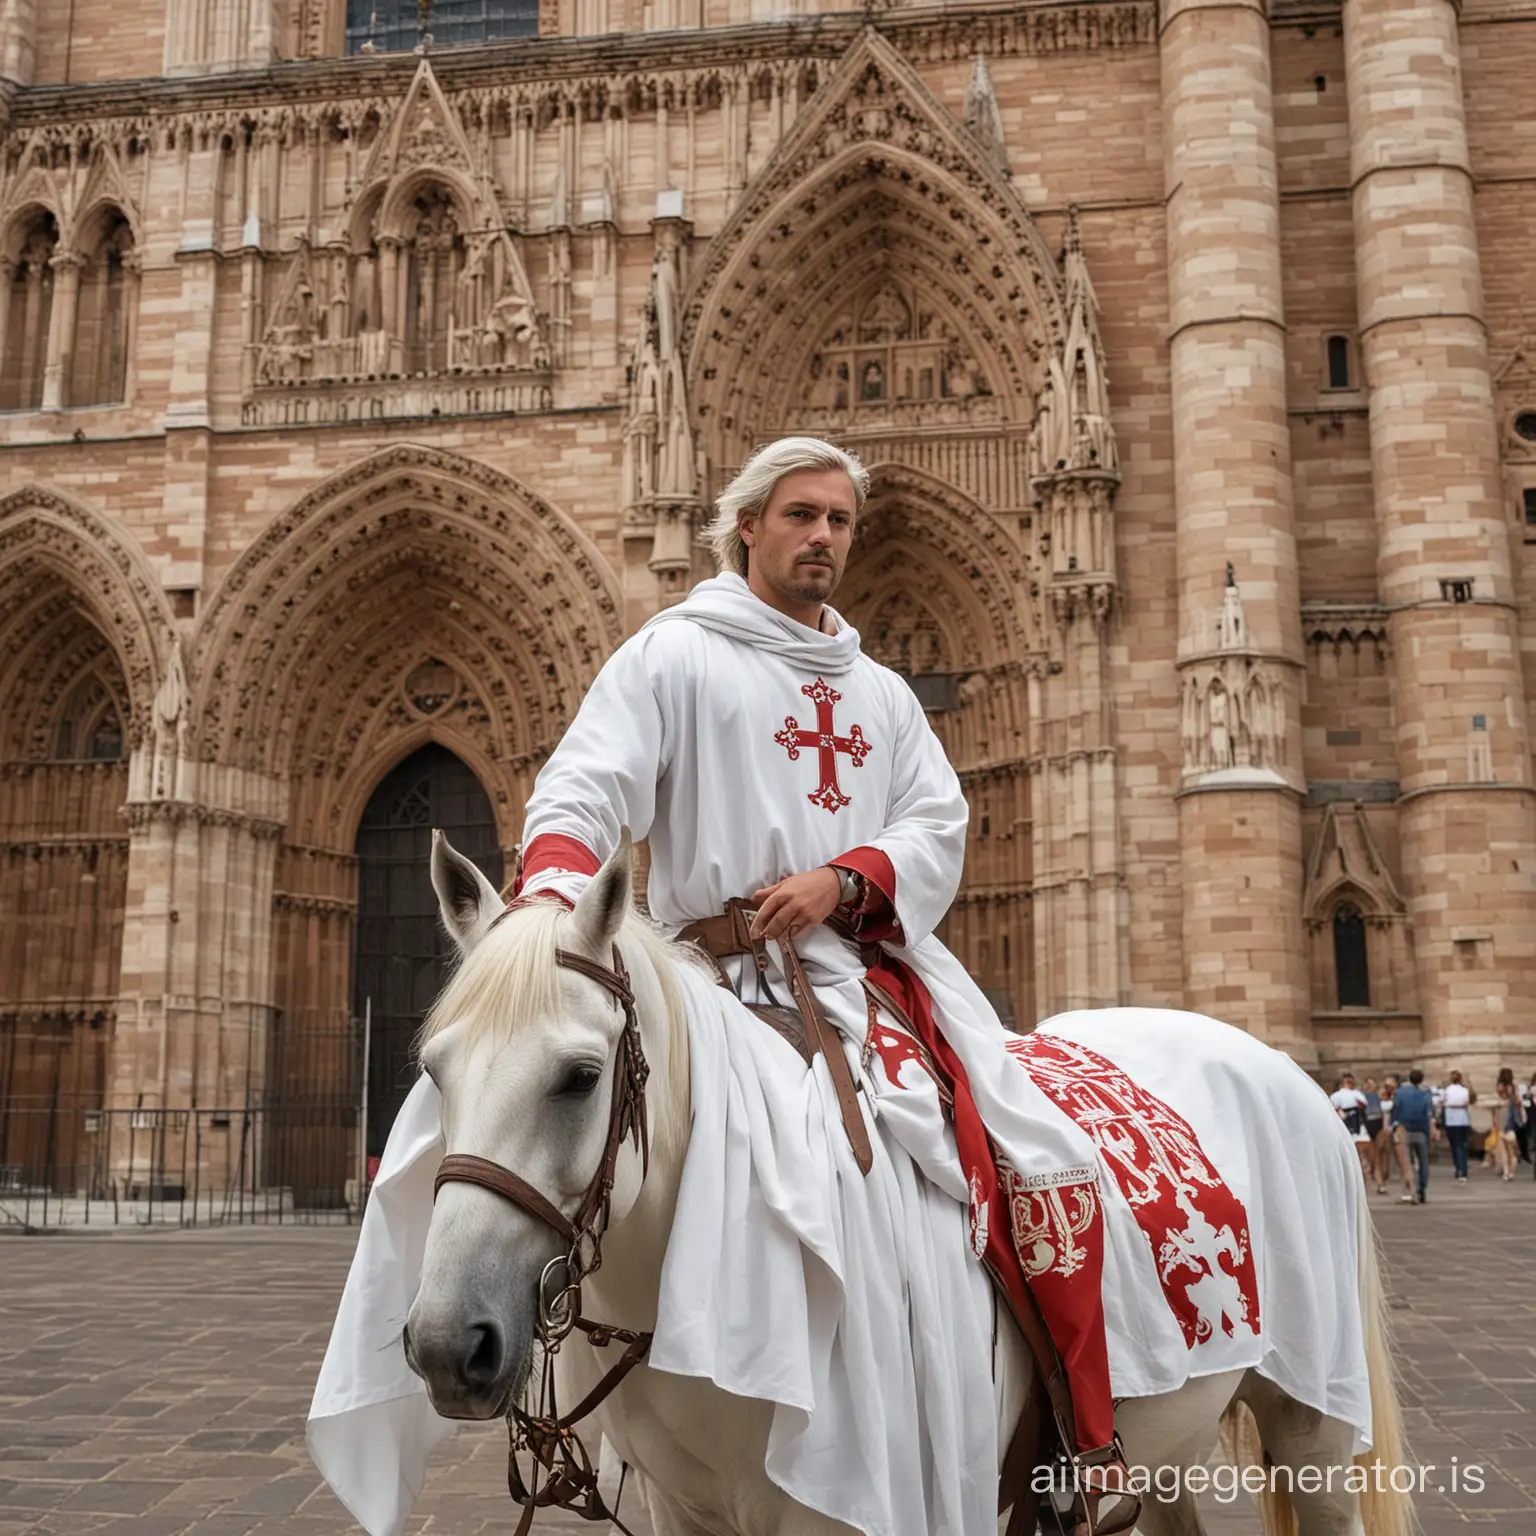 a Cathar knight on his horse in front of the Albi Cathedral, wearing a white robe with an Occitan cross